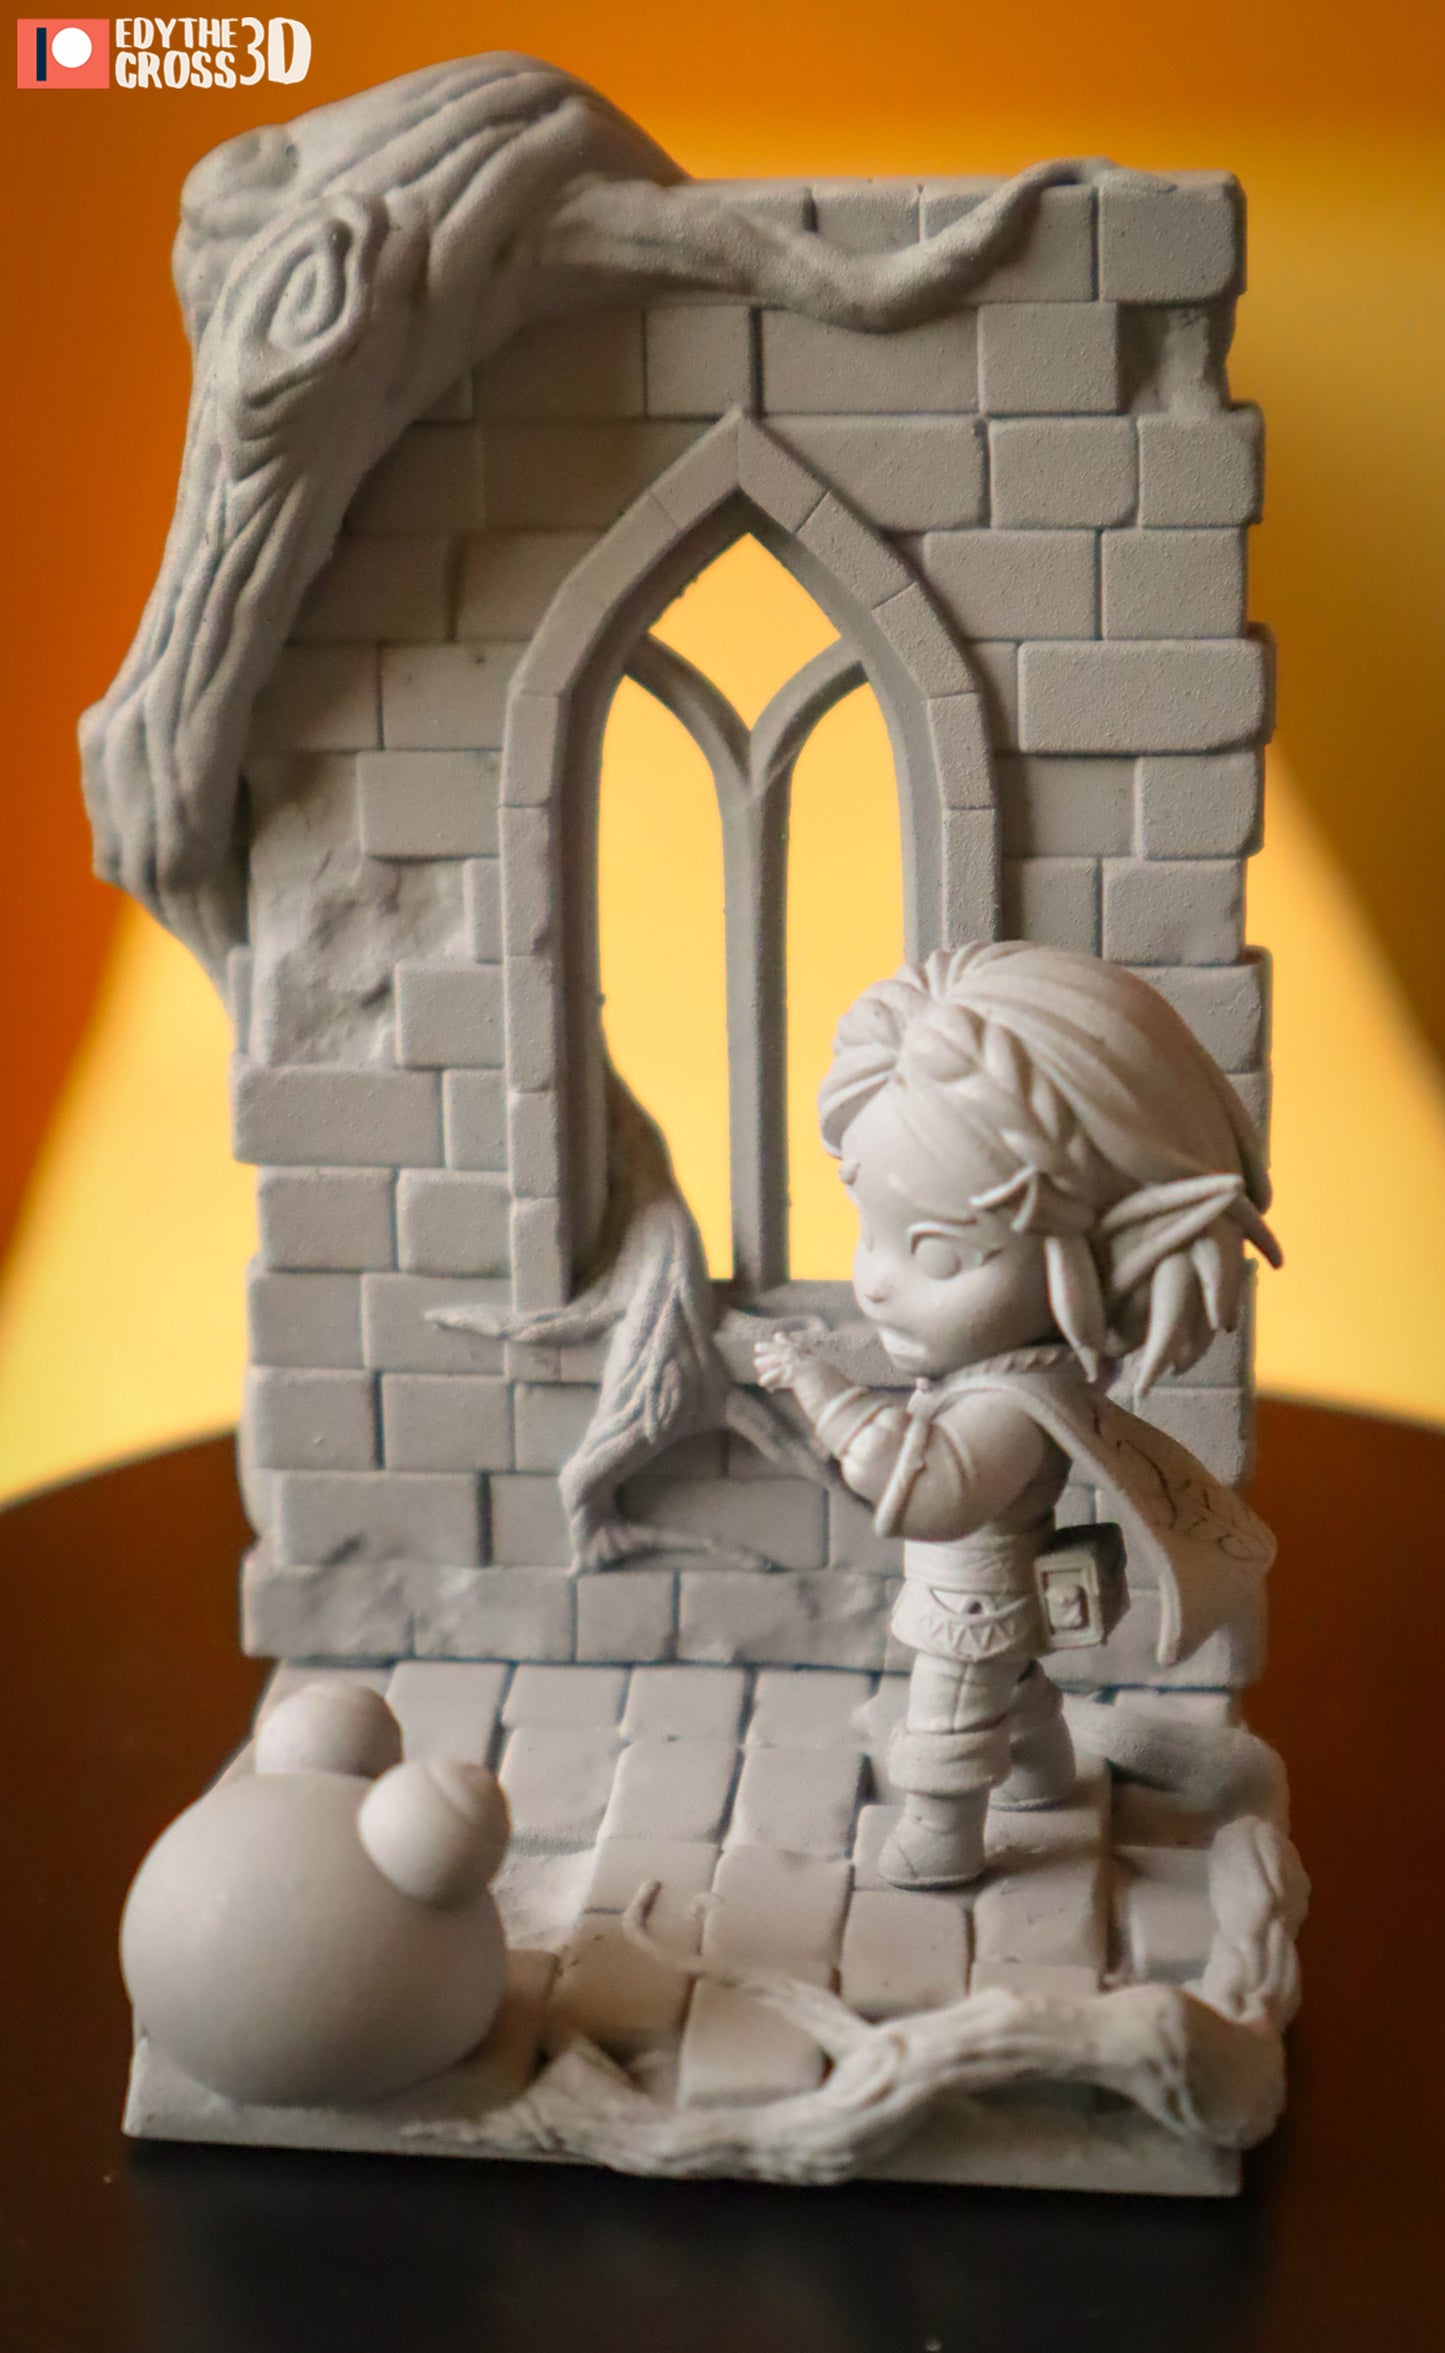 Chibi Princess of High Rule by NomNom Figures